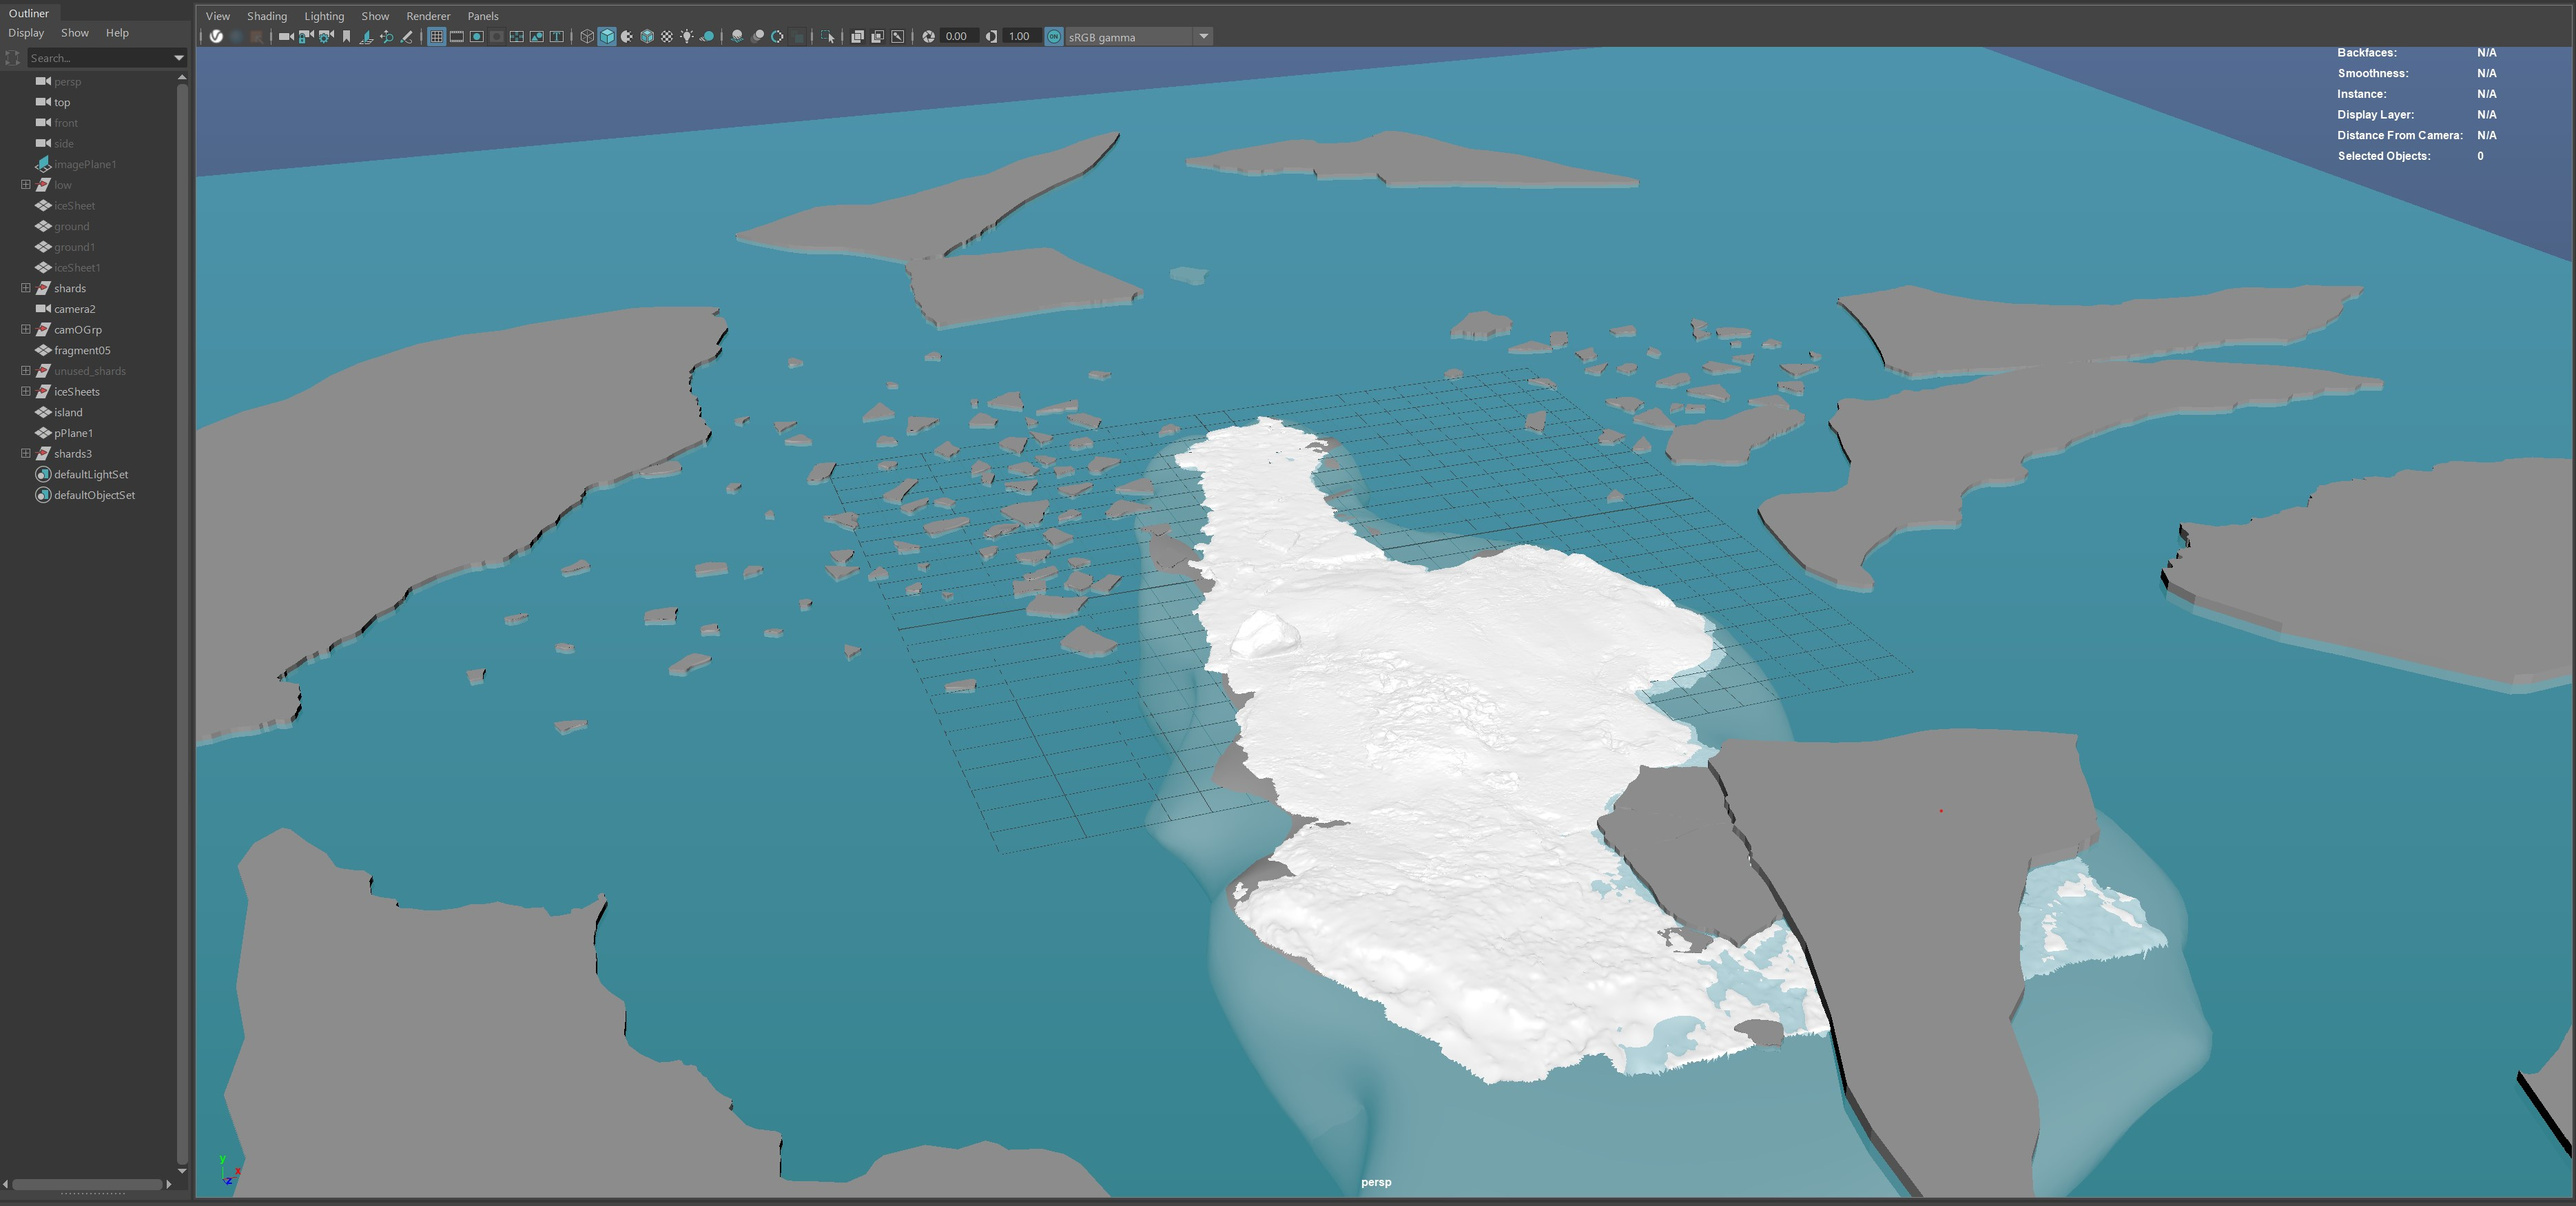 I then cleaned up the data and modeled all the additional ice pieces, island, and large ice sheets using references images of the real location. 